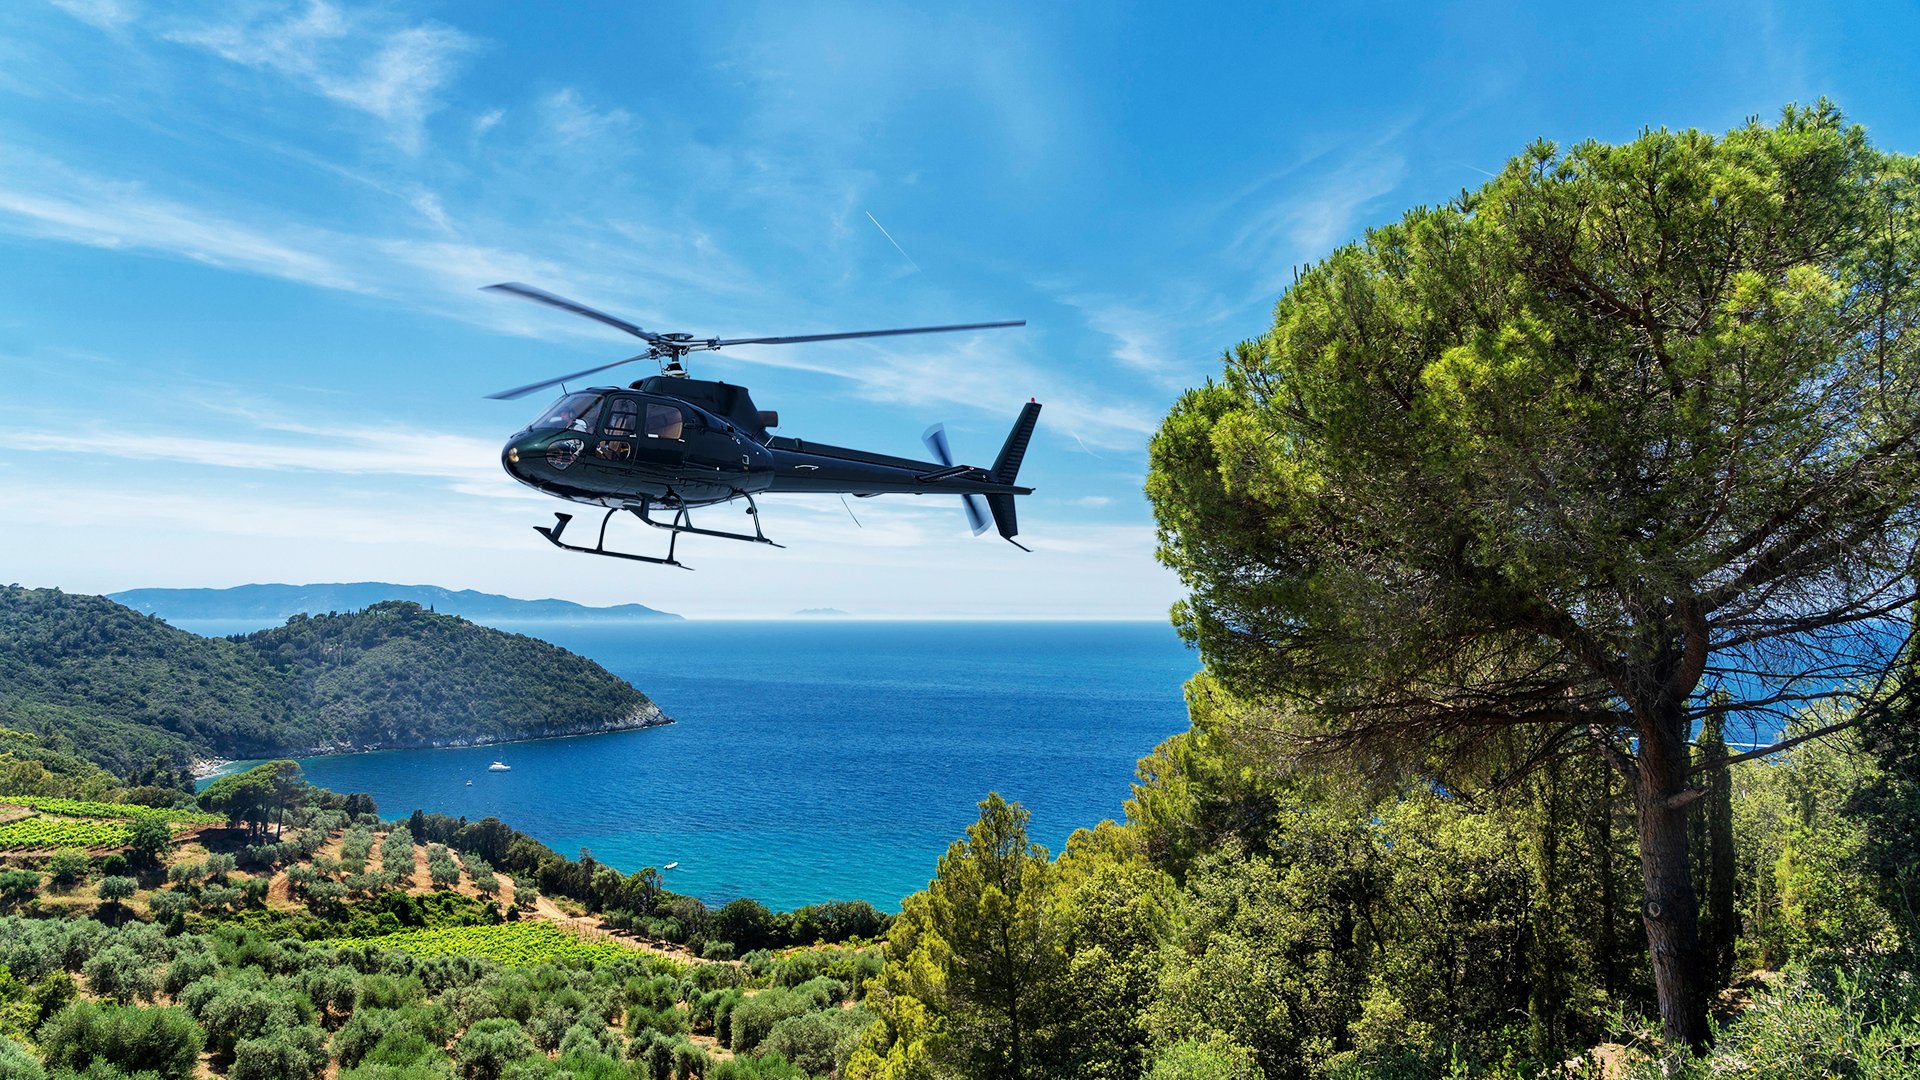 A unique experience by helicopter to observe the most iconic places of Tuscany from above